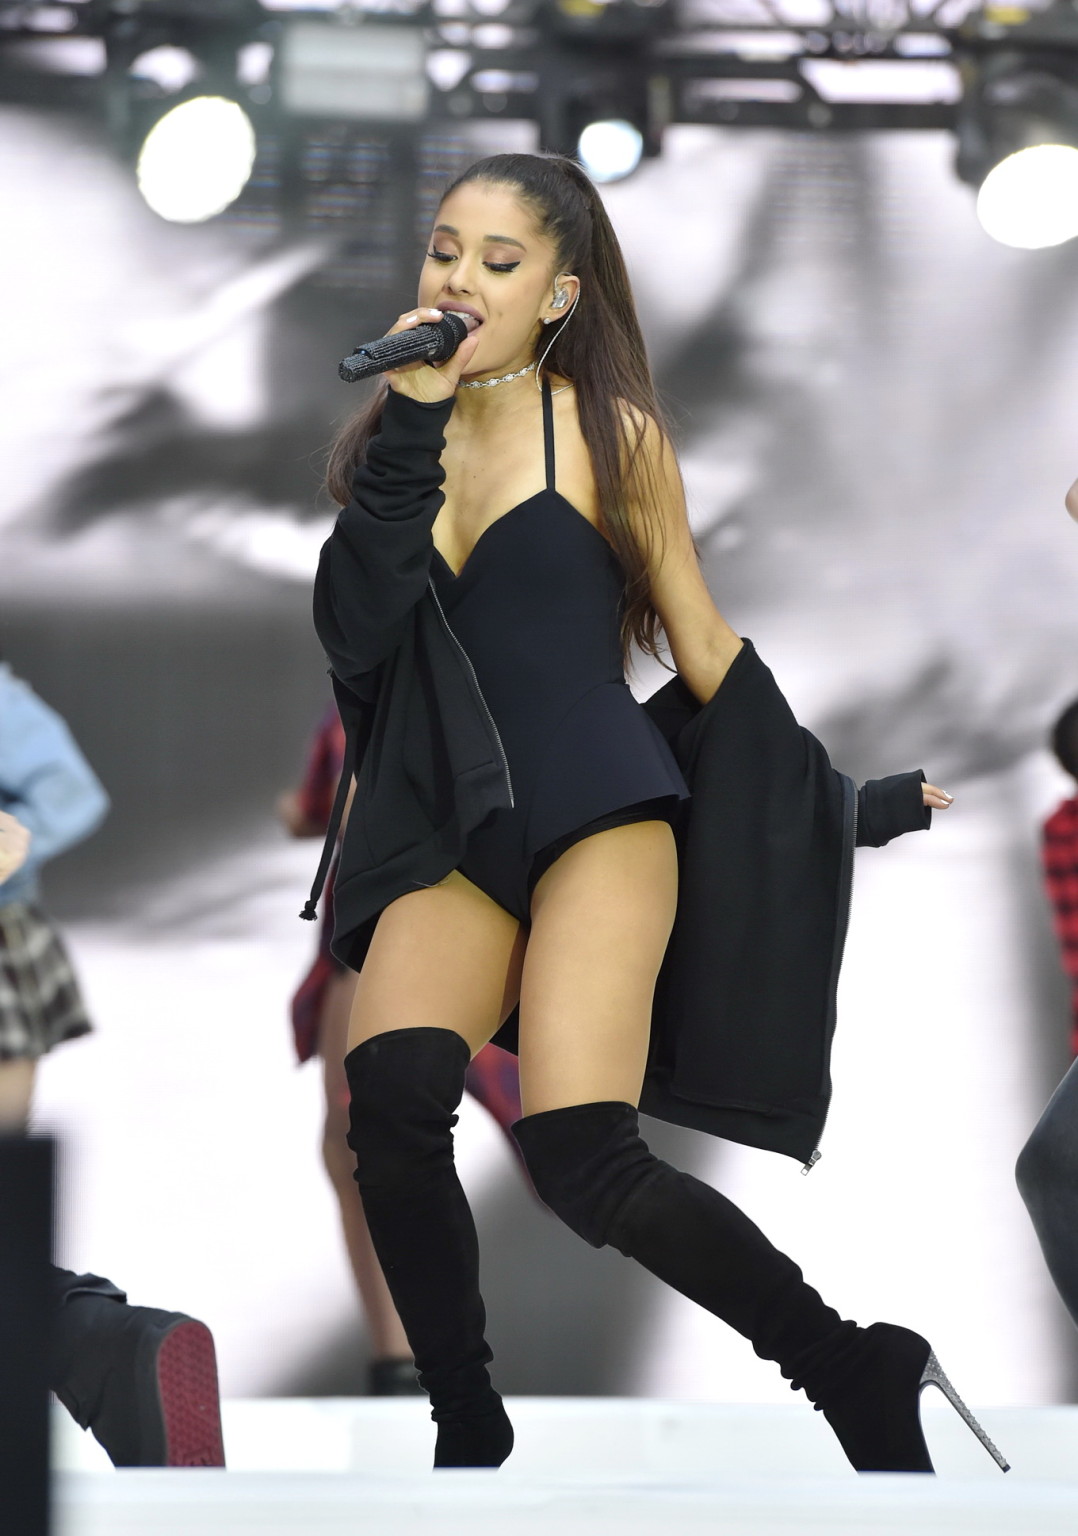 Ariana Grande shows off her shaved pussy in a tiny black outfit while performing #75161925